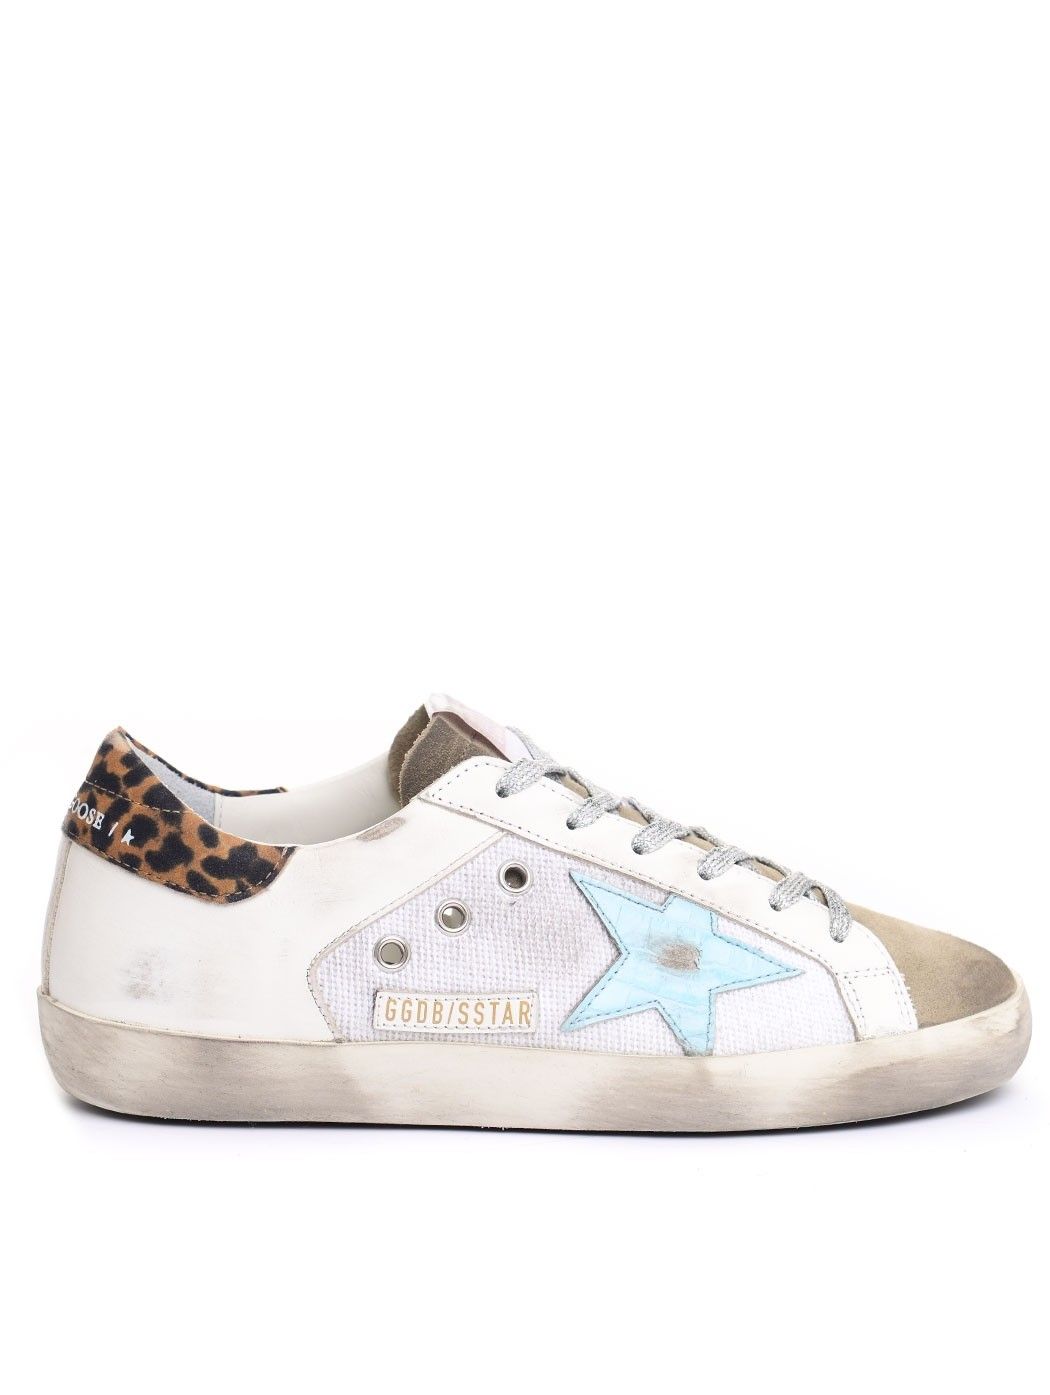  WOMAN SHOES,GIVENCHY SHOES,GOLDEN GOOSE SHOES,MARNI SHOES  GOLDEN GOOSE GWF00103